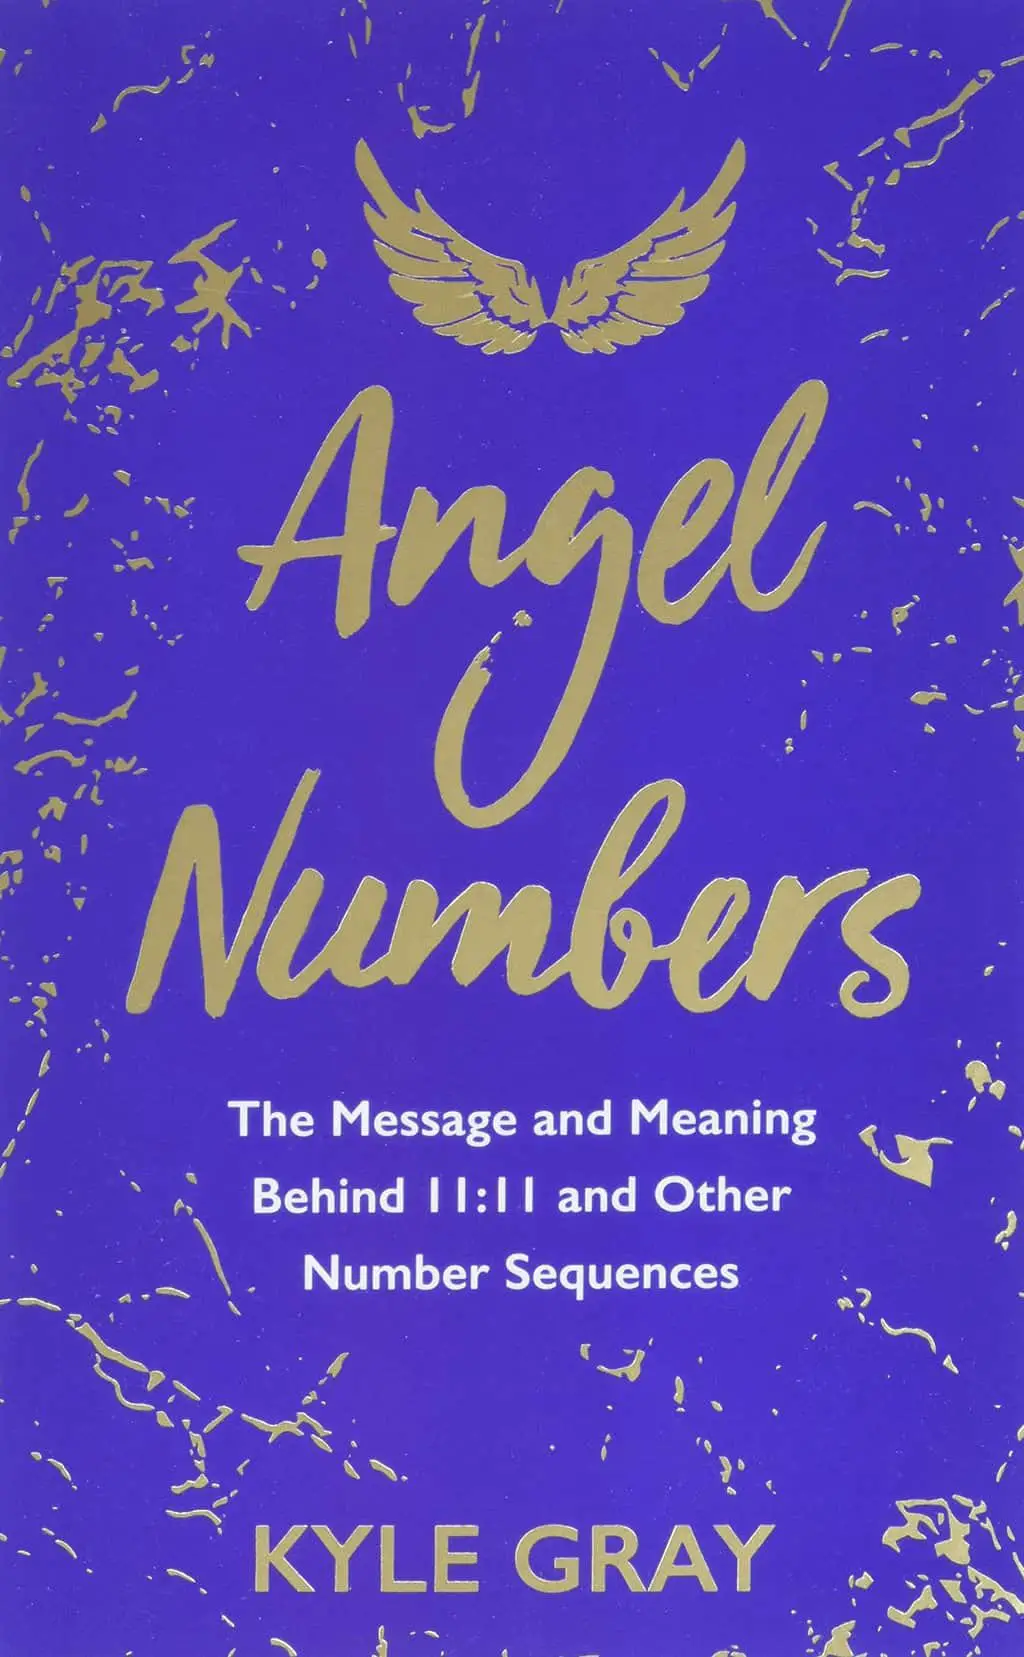 11:11 And Other Angel Numbers